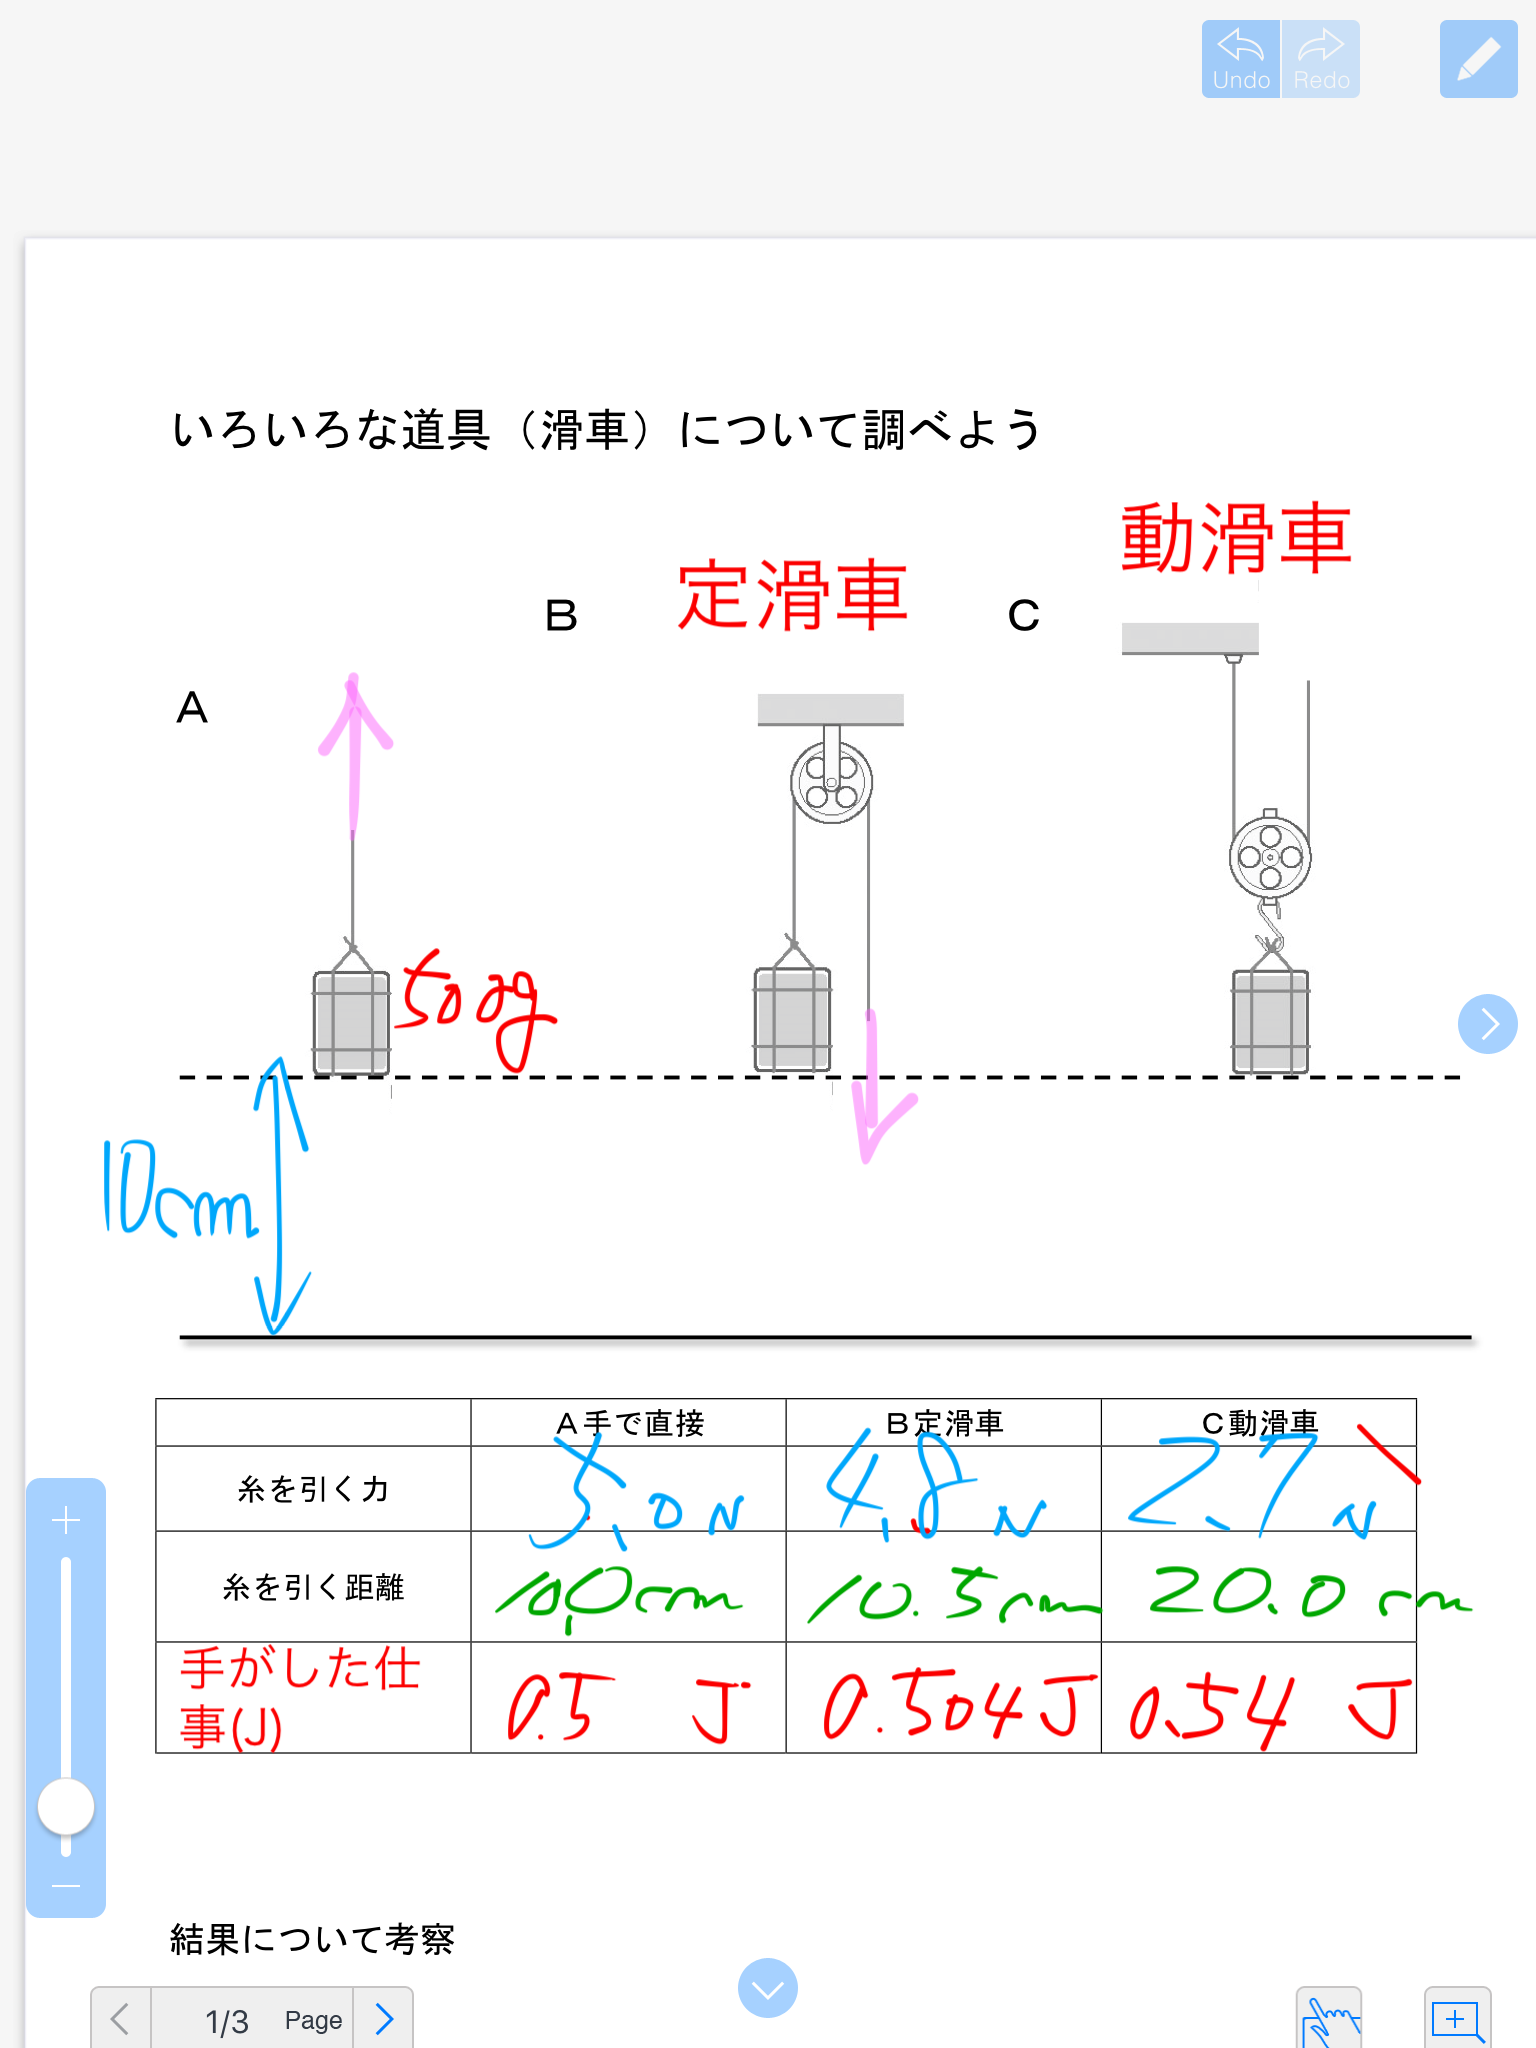 Images Of 定滑車 Japaneseclass Jp